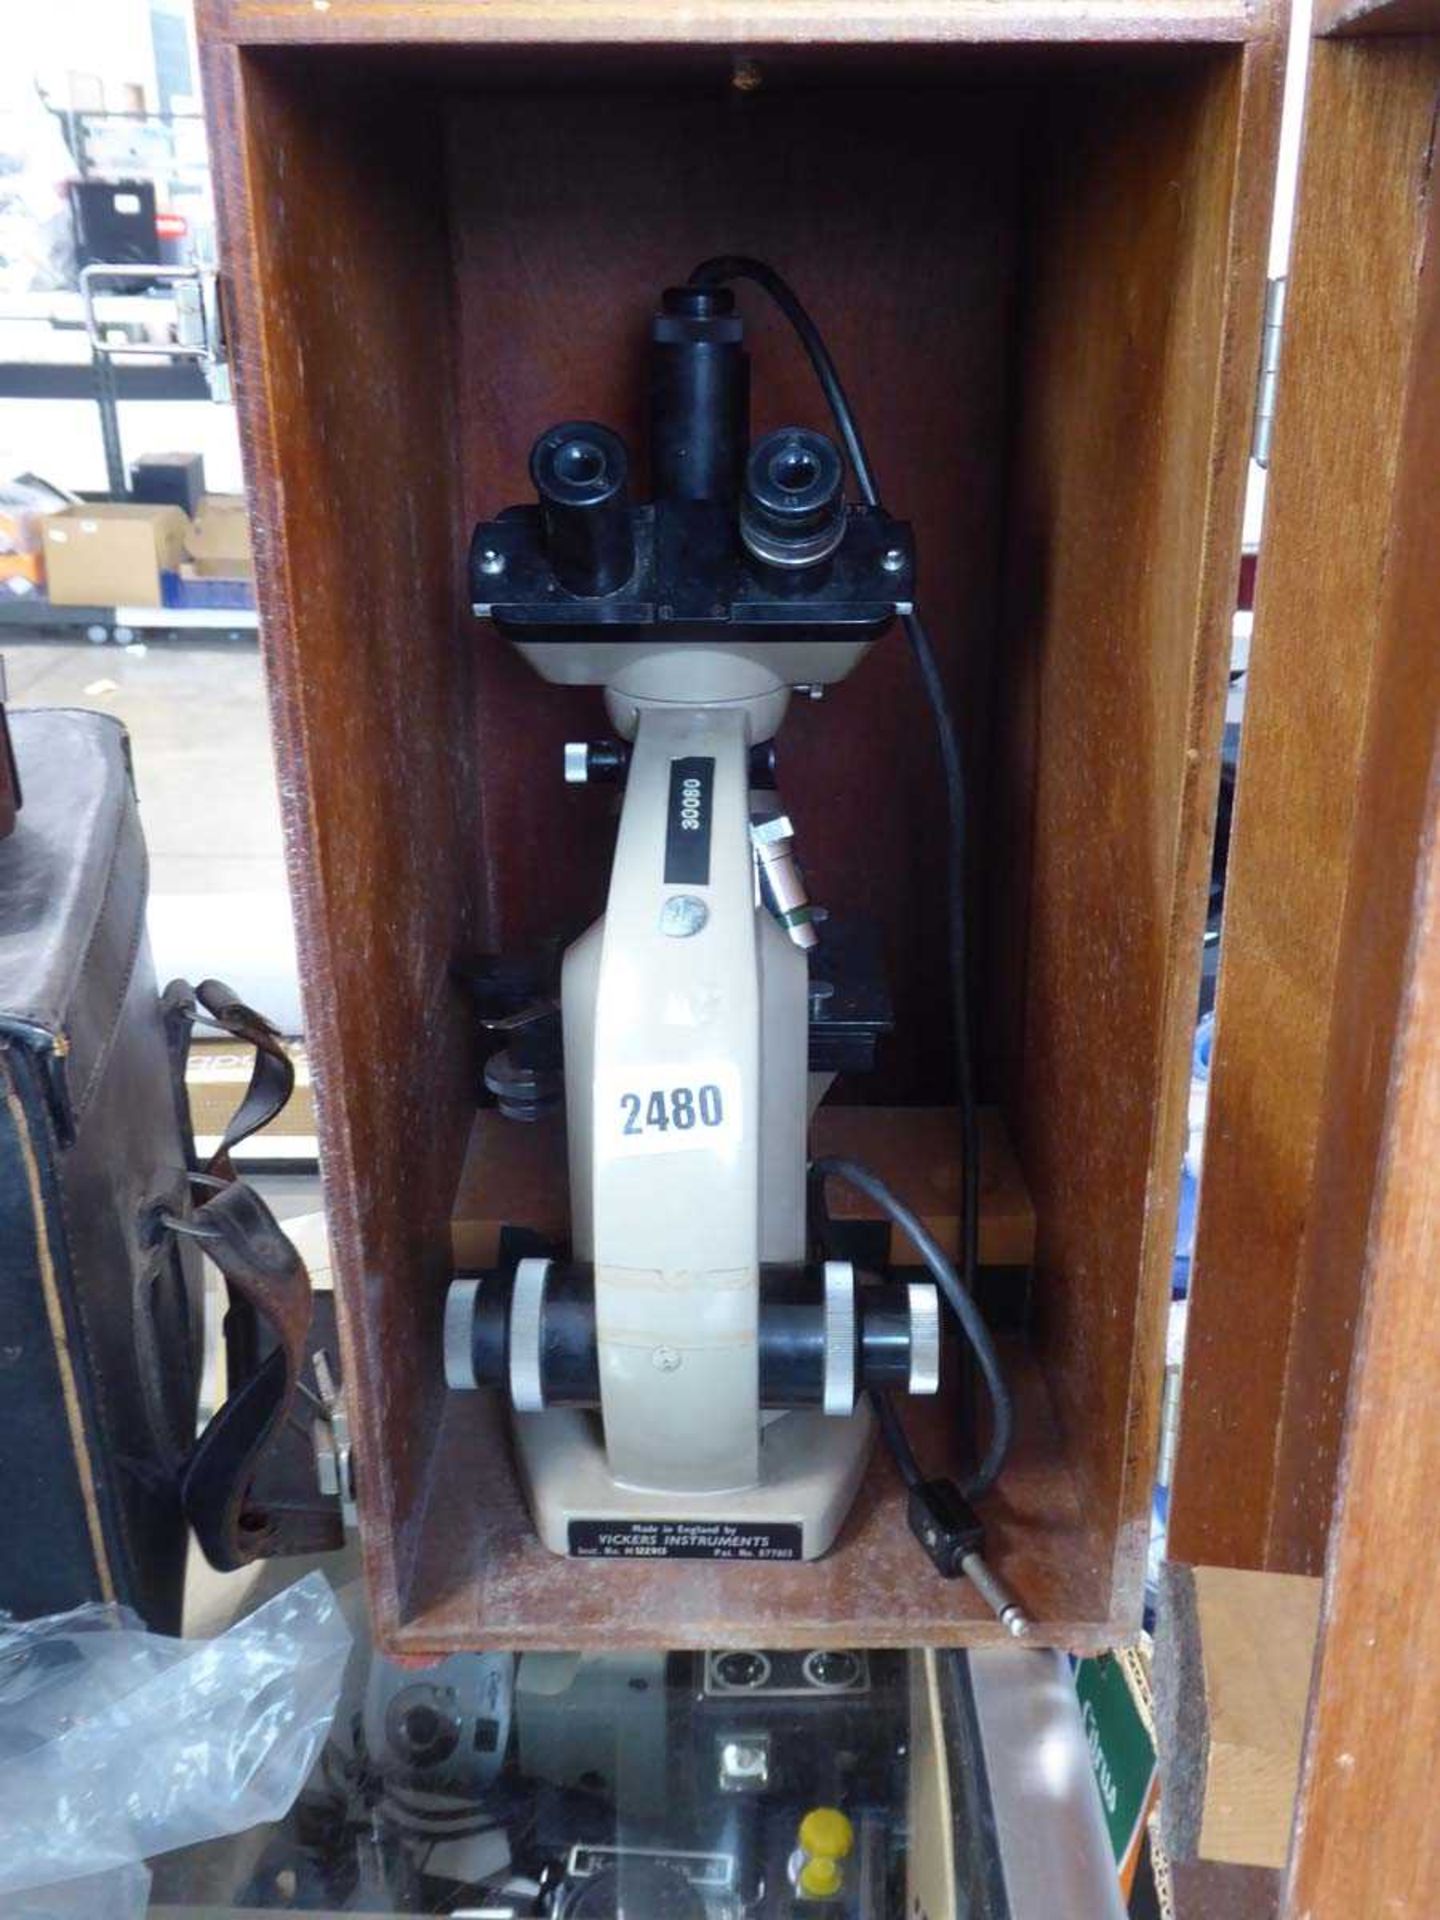 Vickers Instruments microscope in wooden case